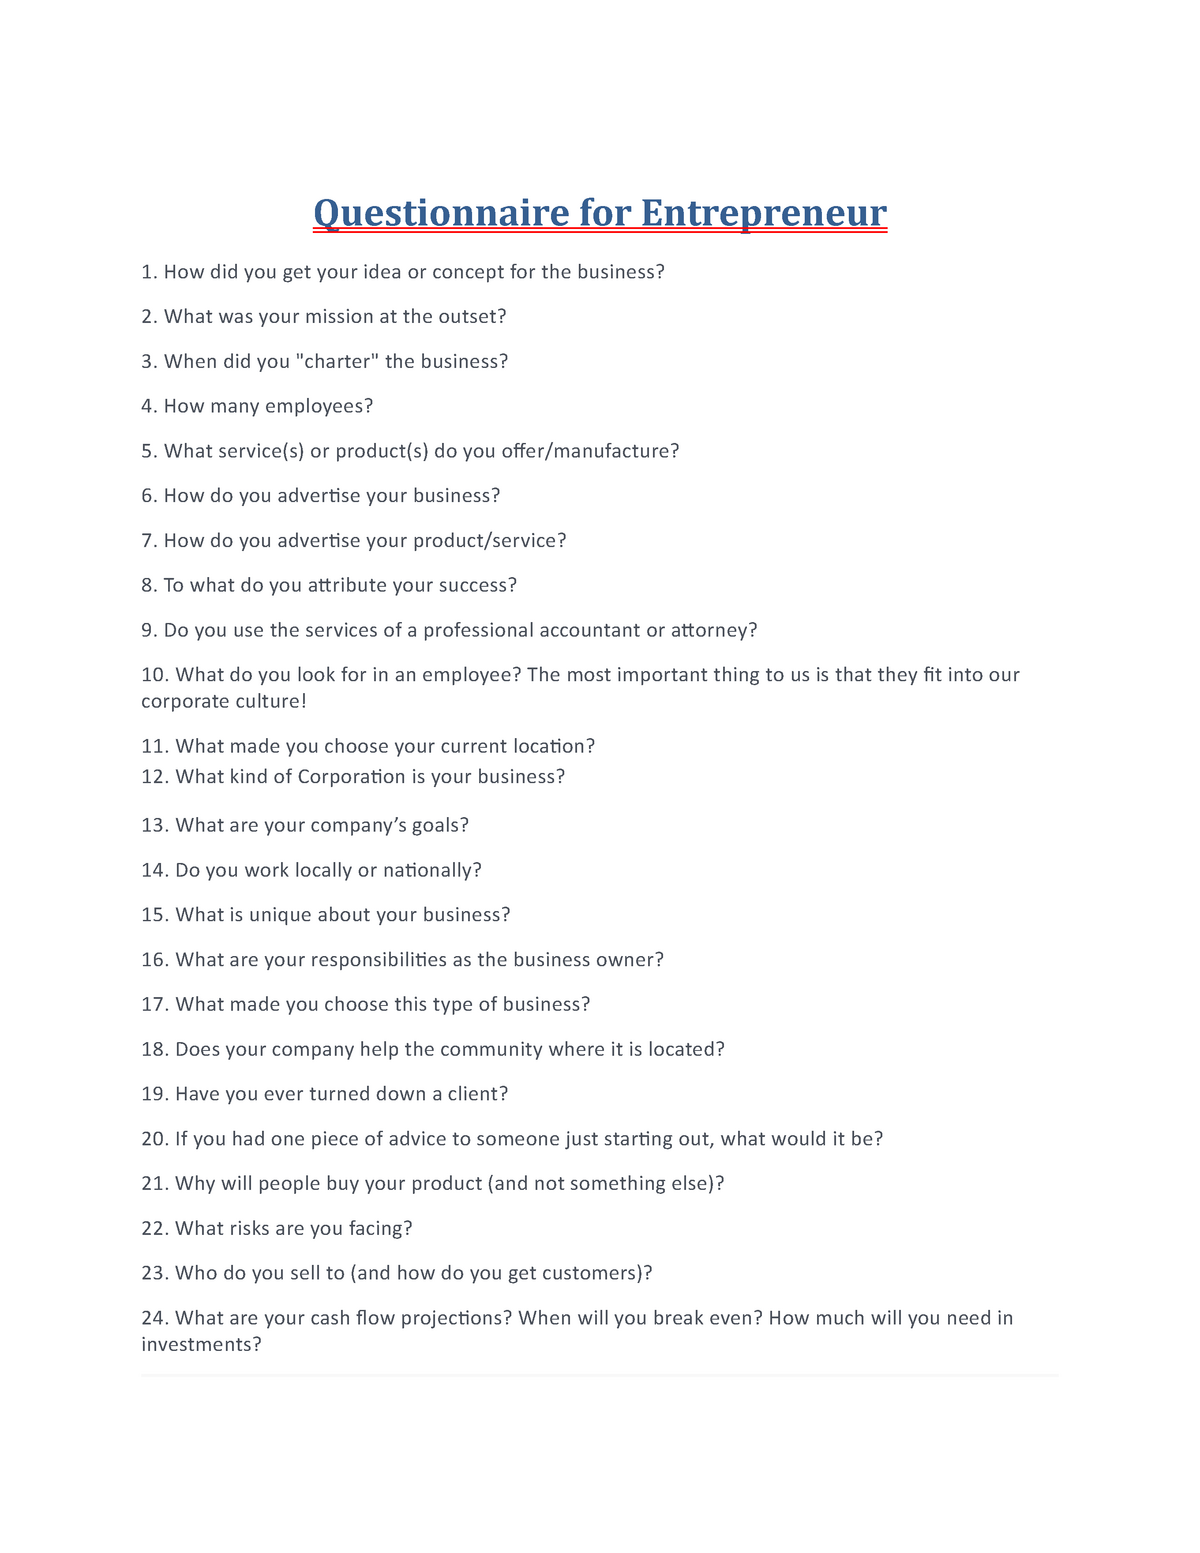 Questionnaire For Entrepreneurship And Business Plan Development For Business Plan Questionnaire Template